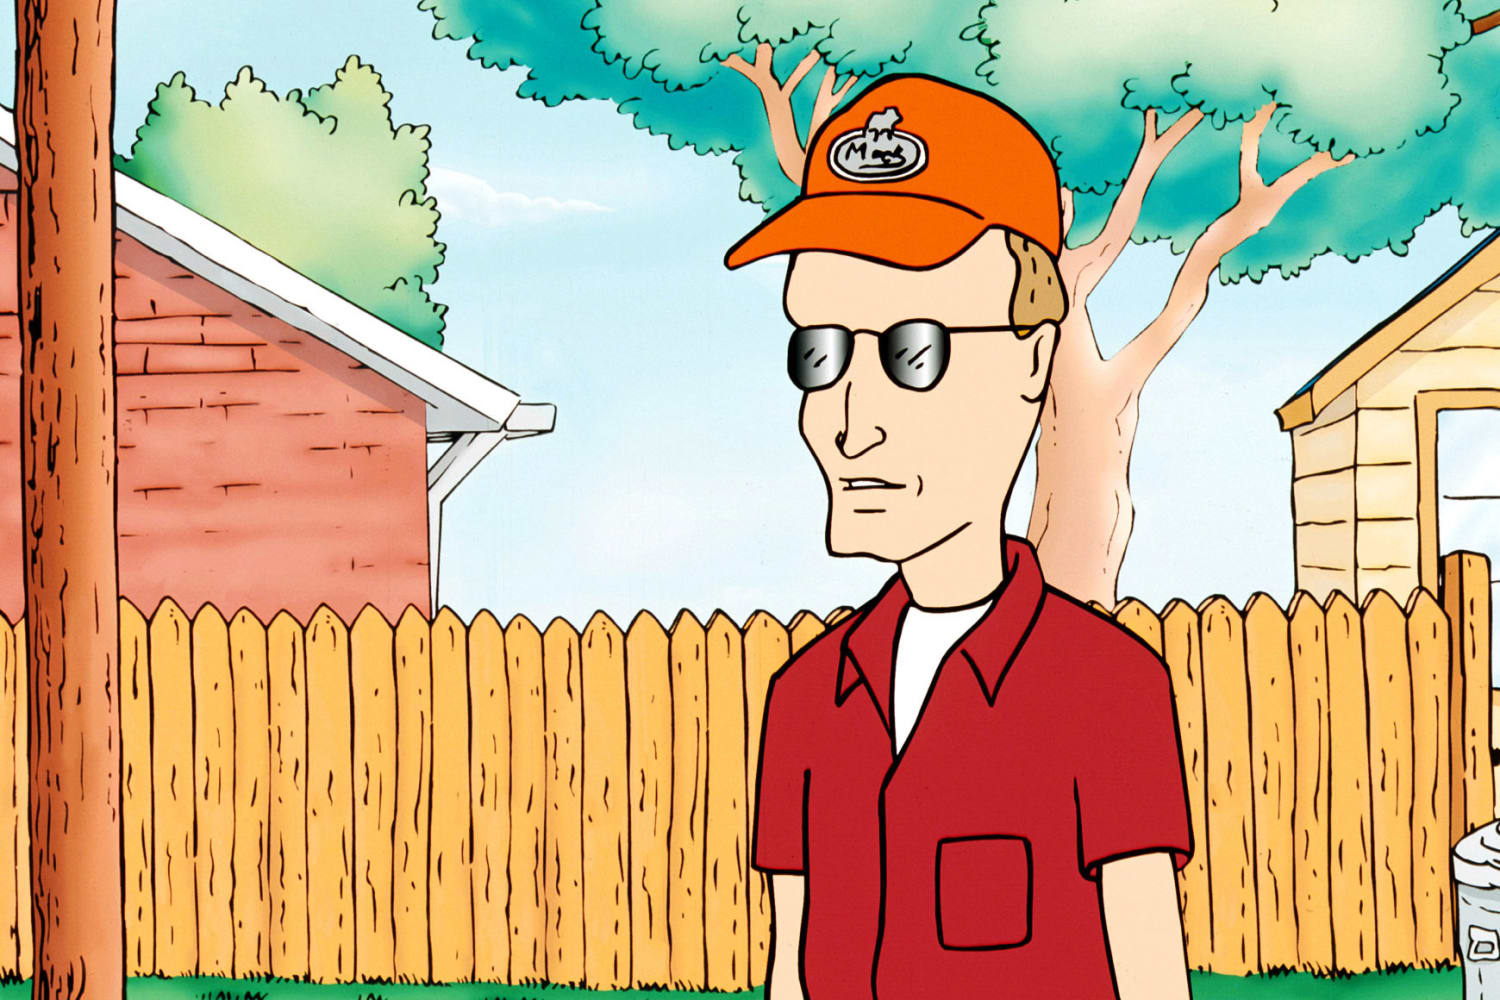 Johnny Hardwick, Dale From 'King of the Hill,' Dead at 64